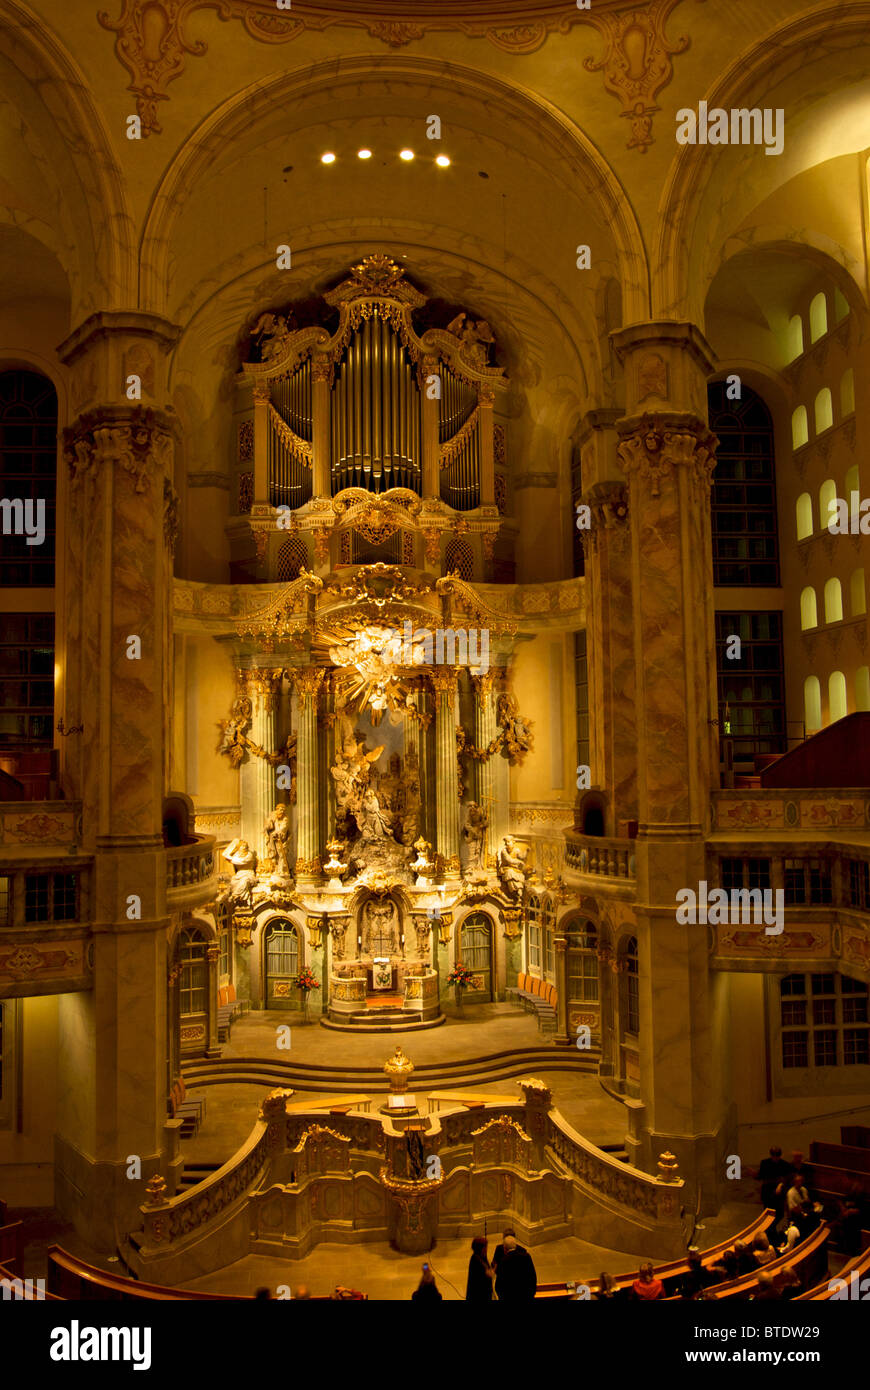 Grand apse and pipe organ in restored Frauenkirche 'Church of our Lady' after its complete destruction in WWII Dresden bombing Stock Photo